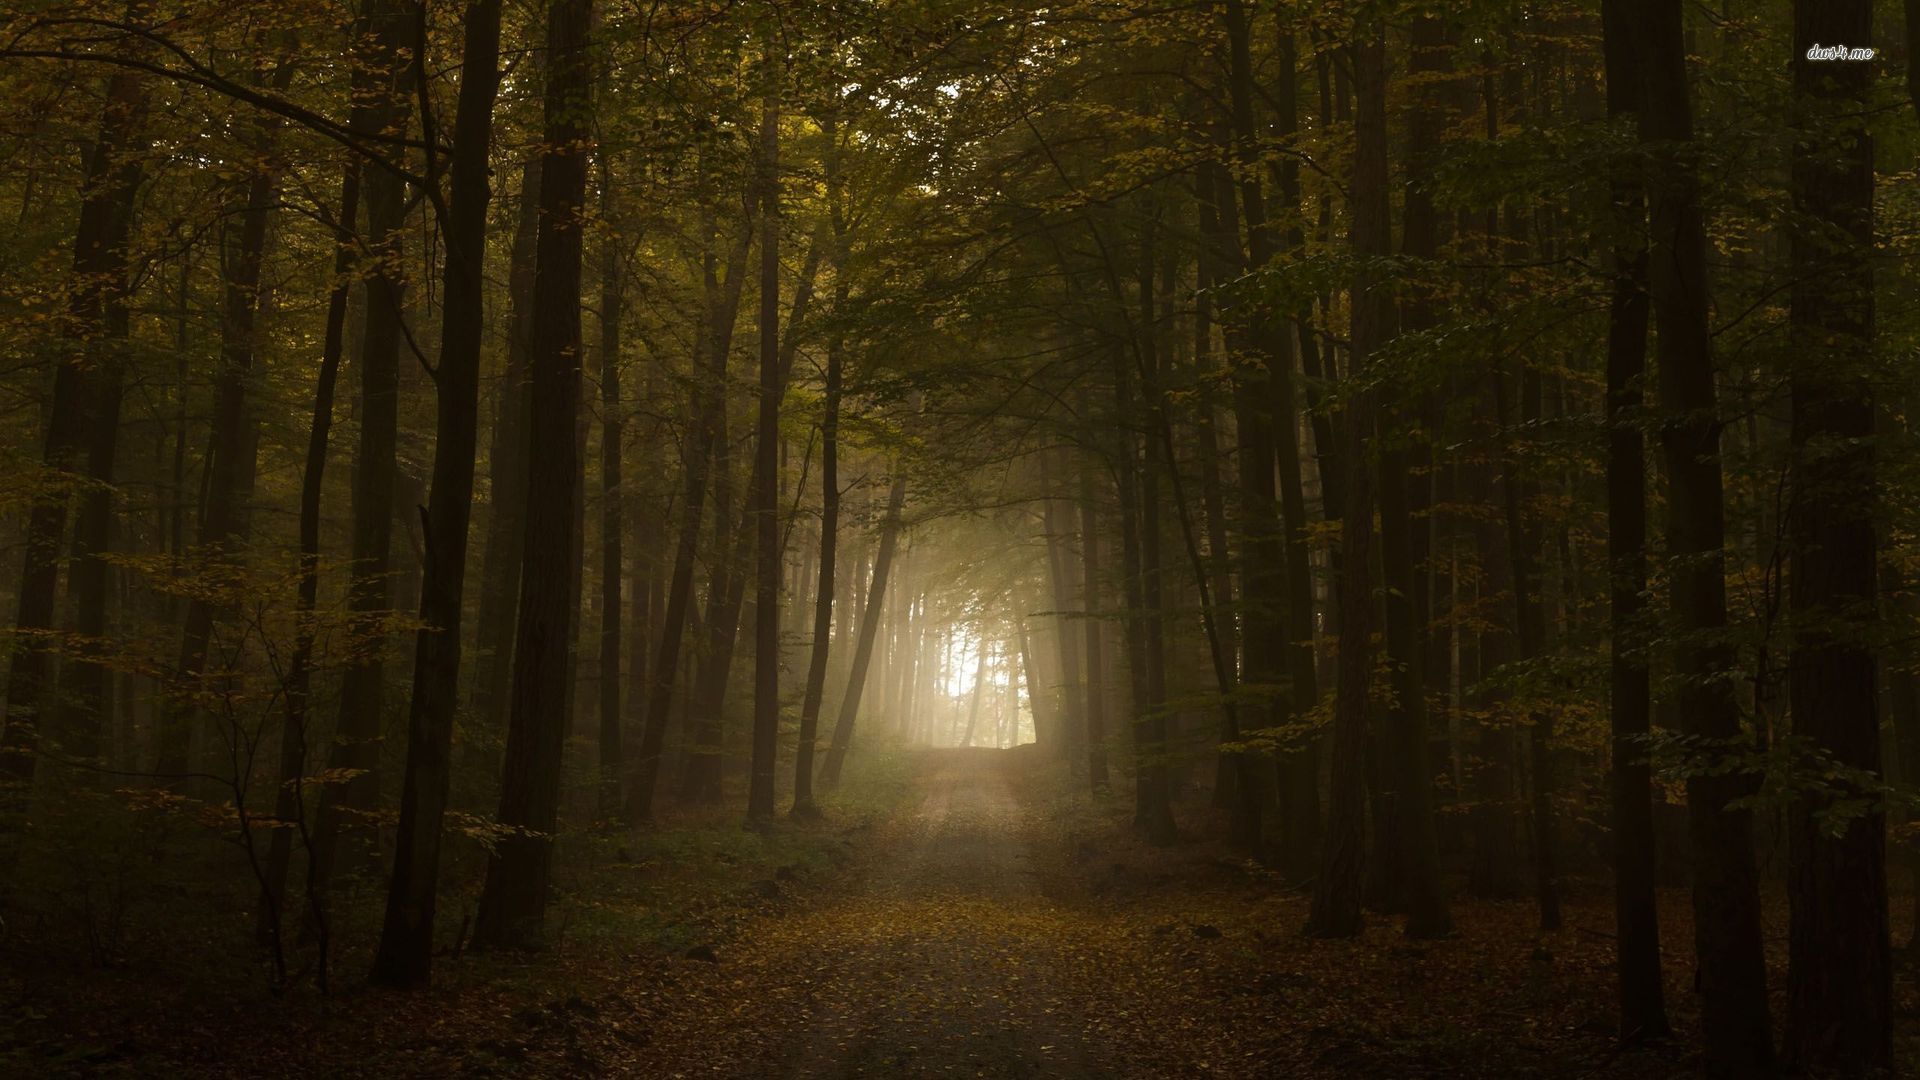 Road through the misty woods wallpaper - Nature wallpapers - #26970